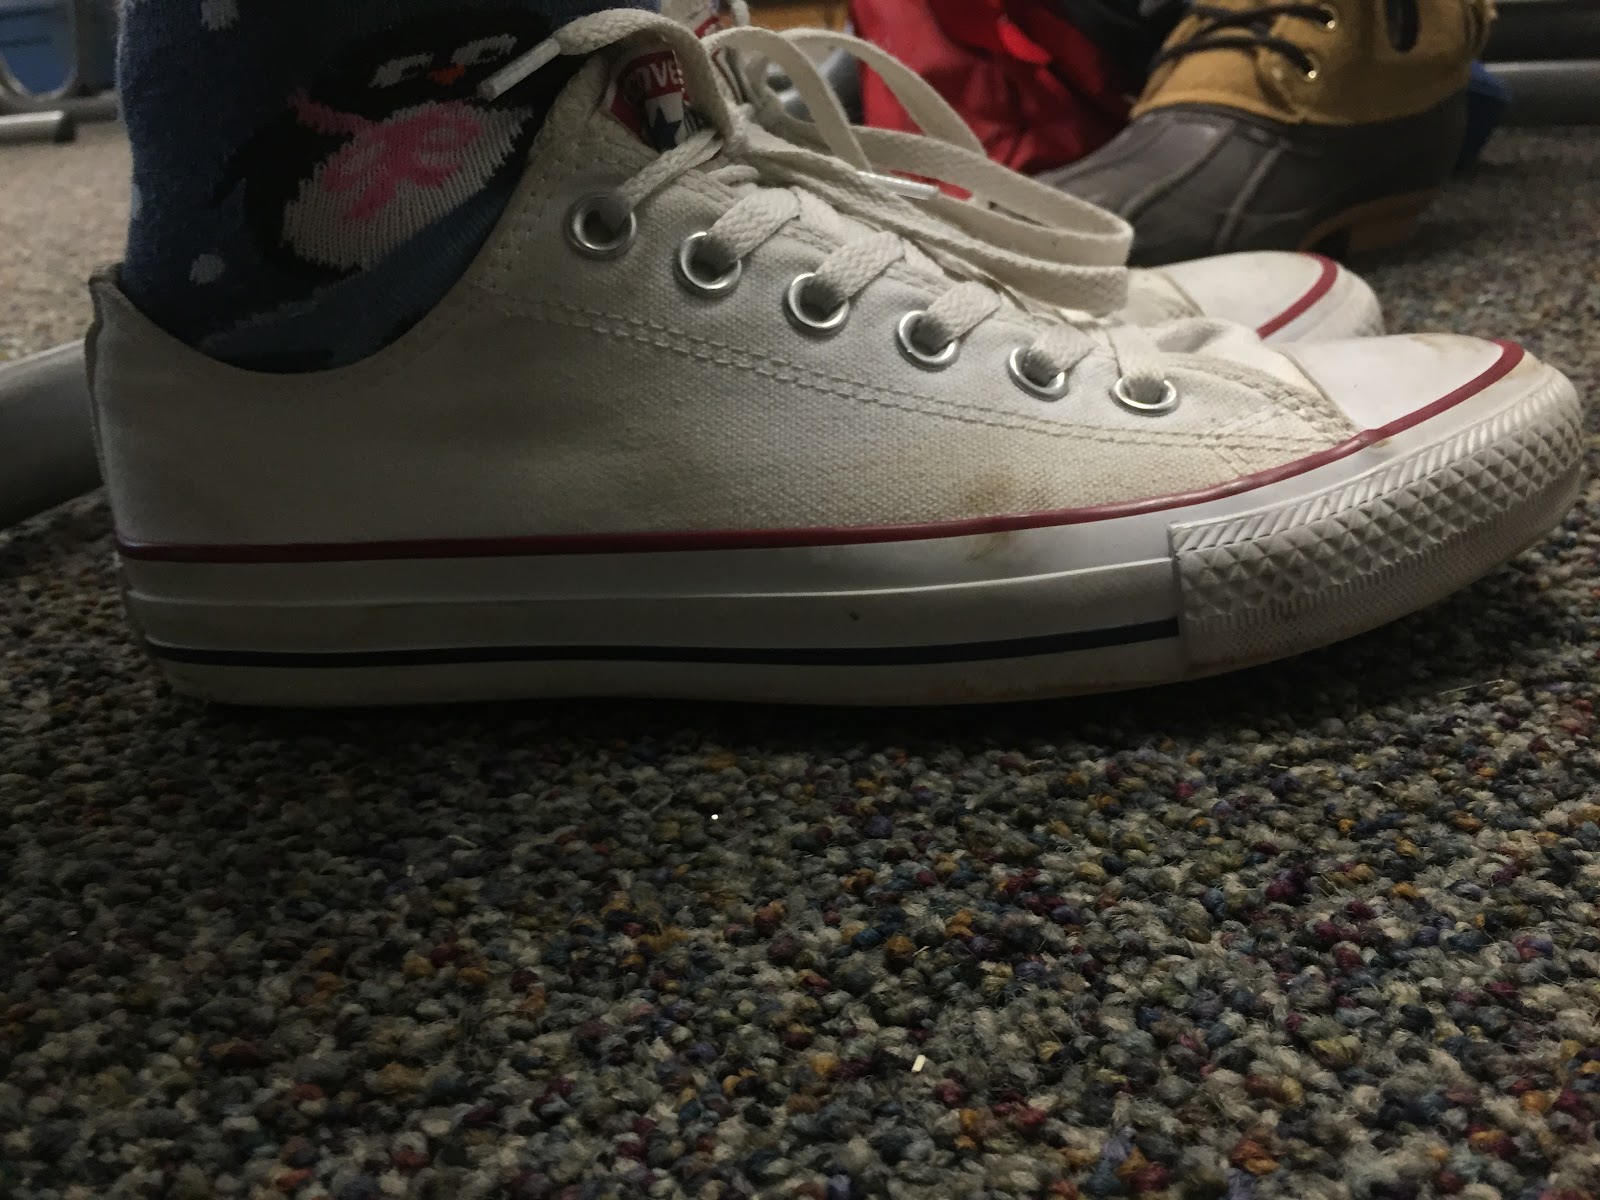 Converse Growing in Popularity Among Girls